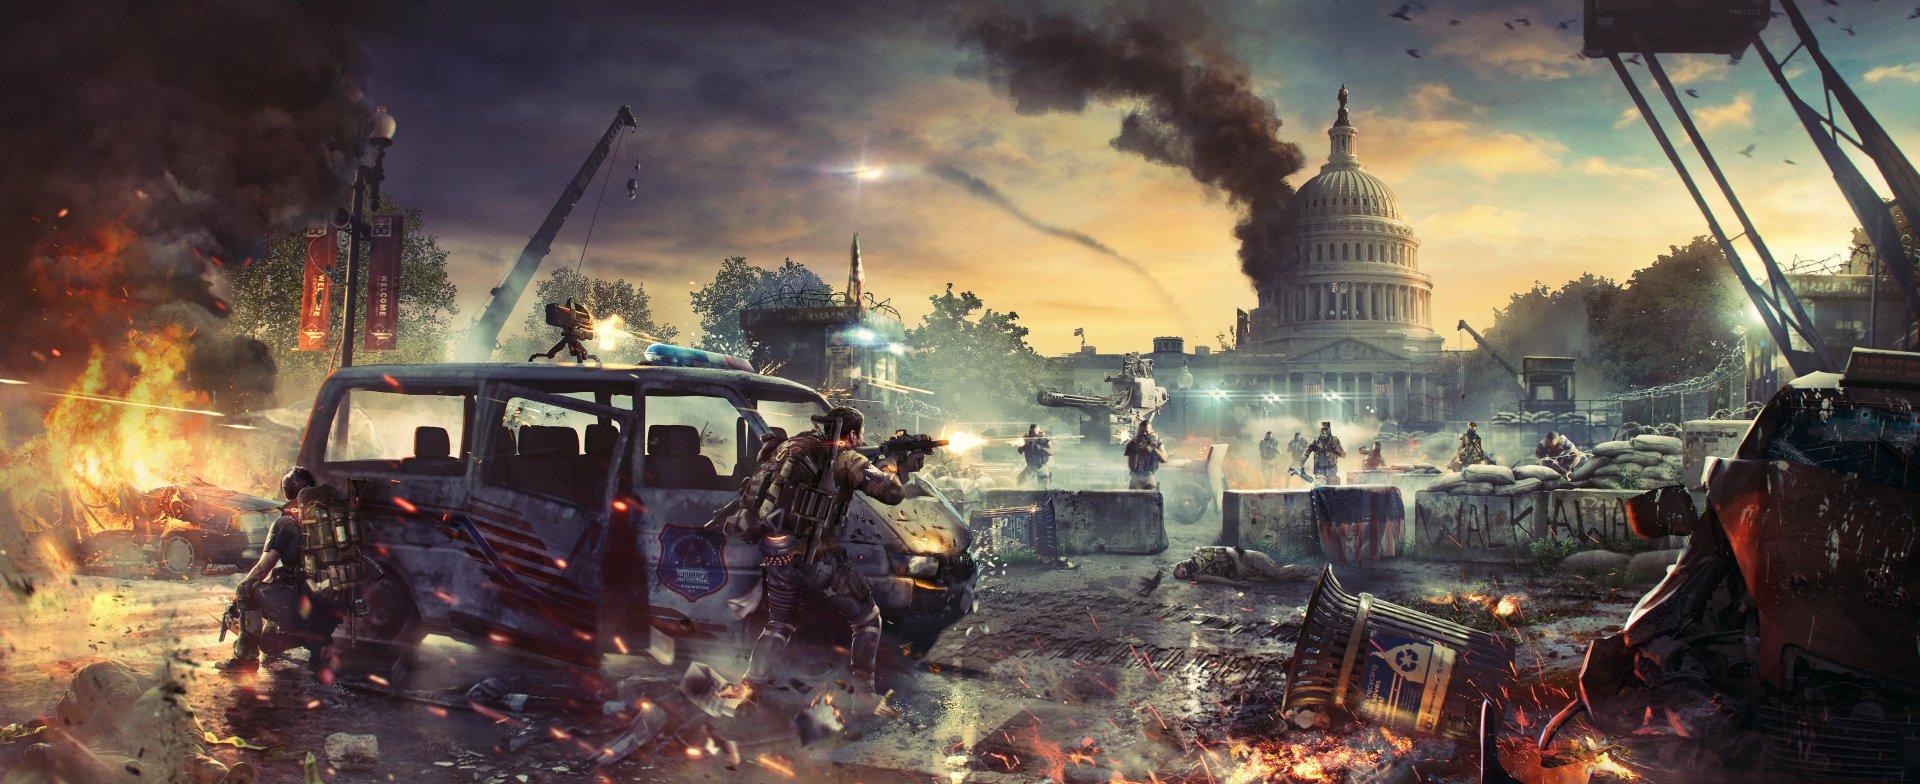 Tom Clancy's The Division 2 HD Wallpaper. Background